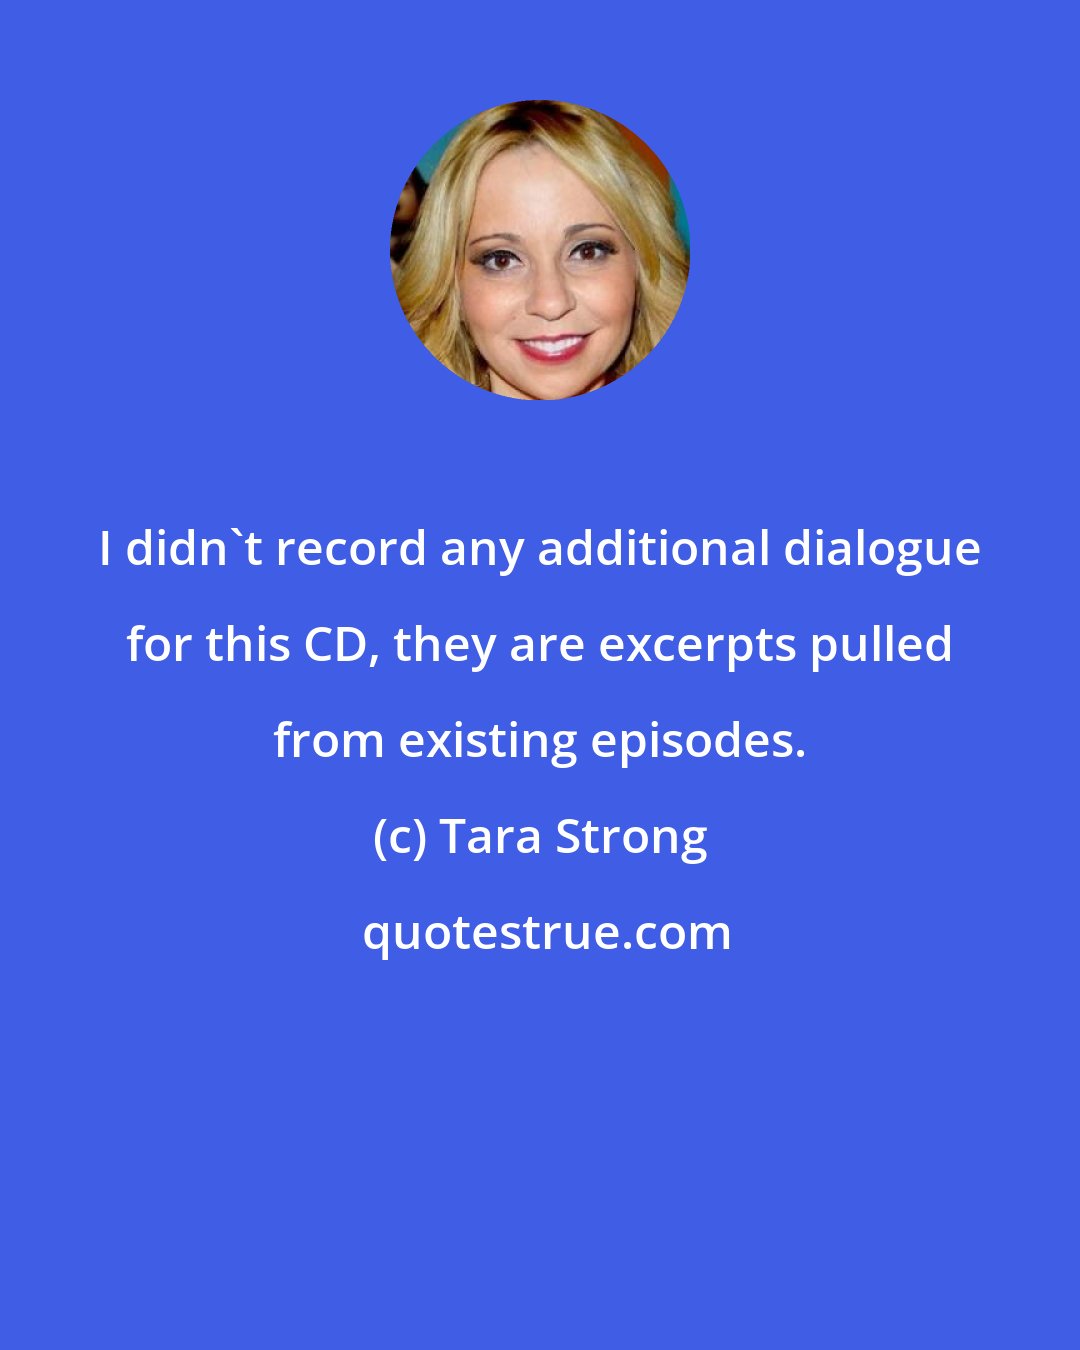 Tara Strong: I didn't record any additional dialogue for this CD, they are excerpts pulled from existing episodes.